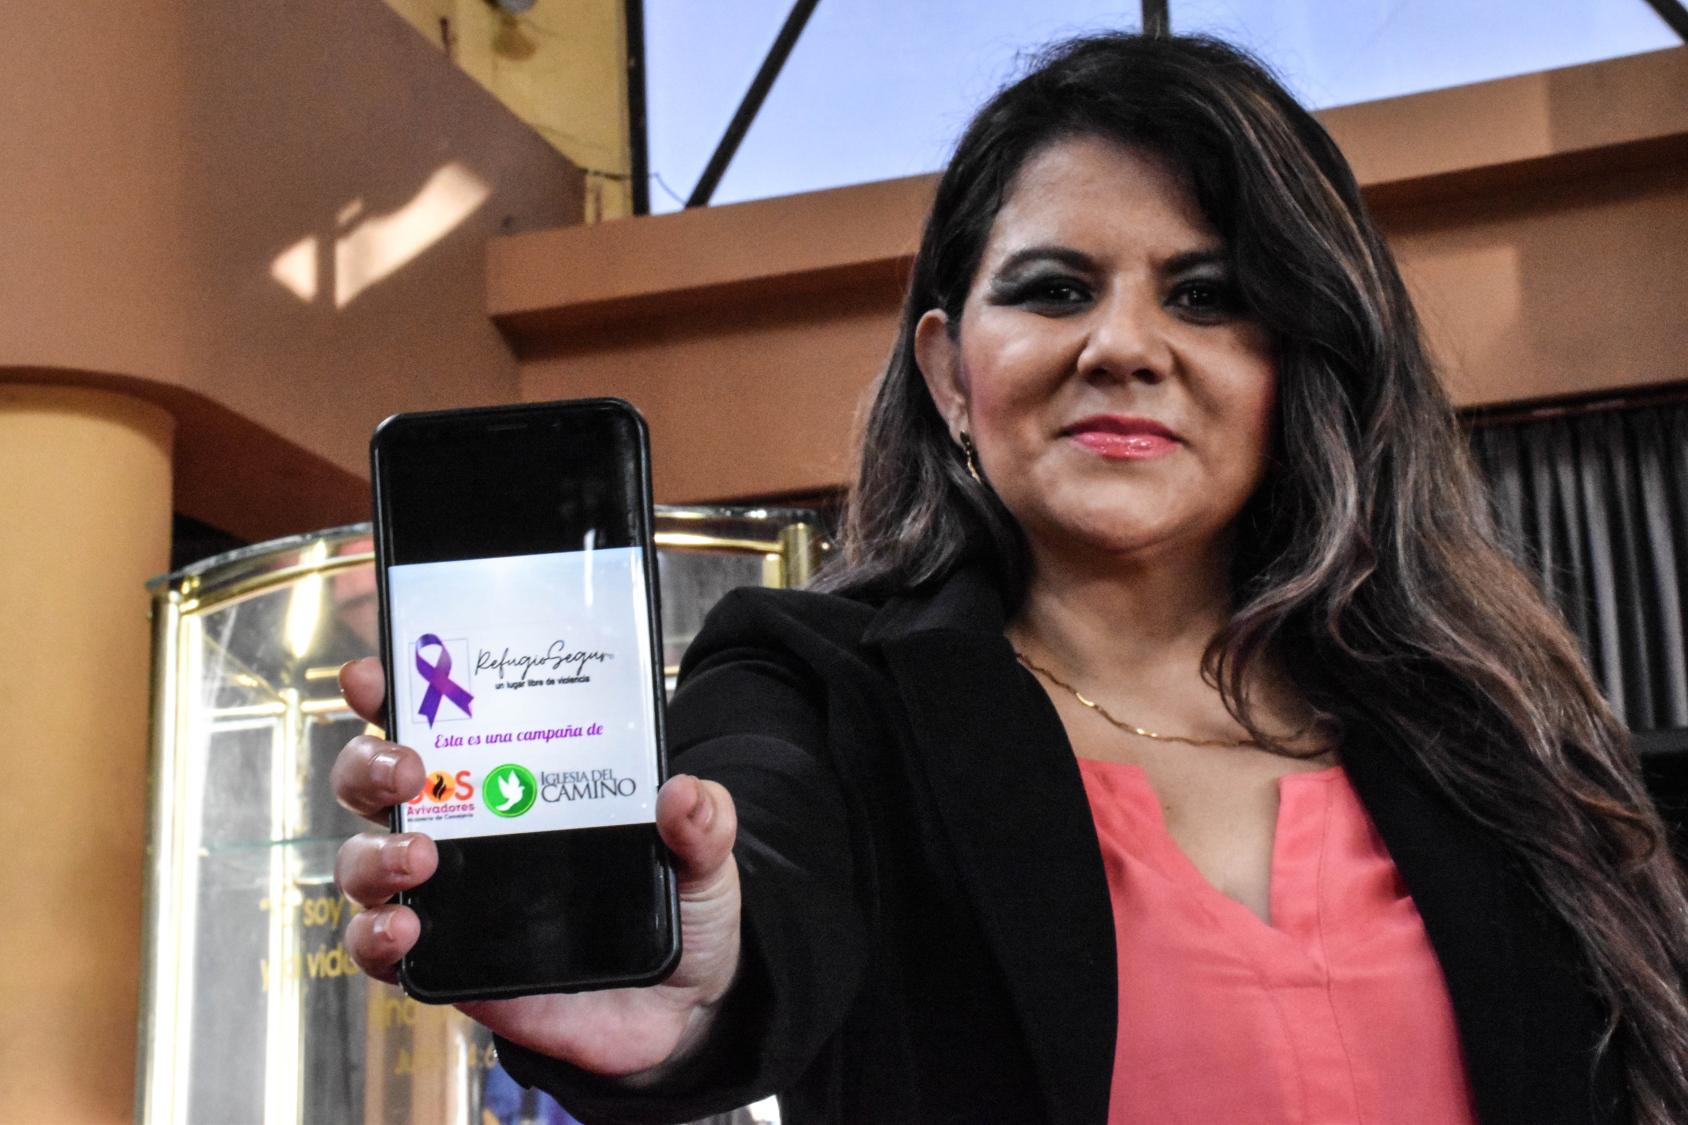 A woman facing the camera holds up a phone displaying a purple ribbon and words "Refugio Seguro." 